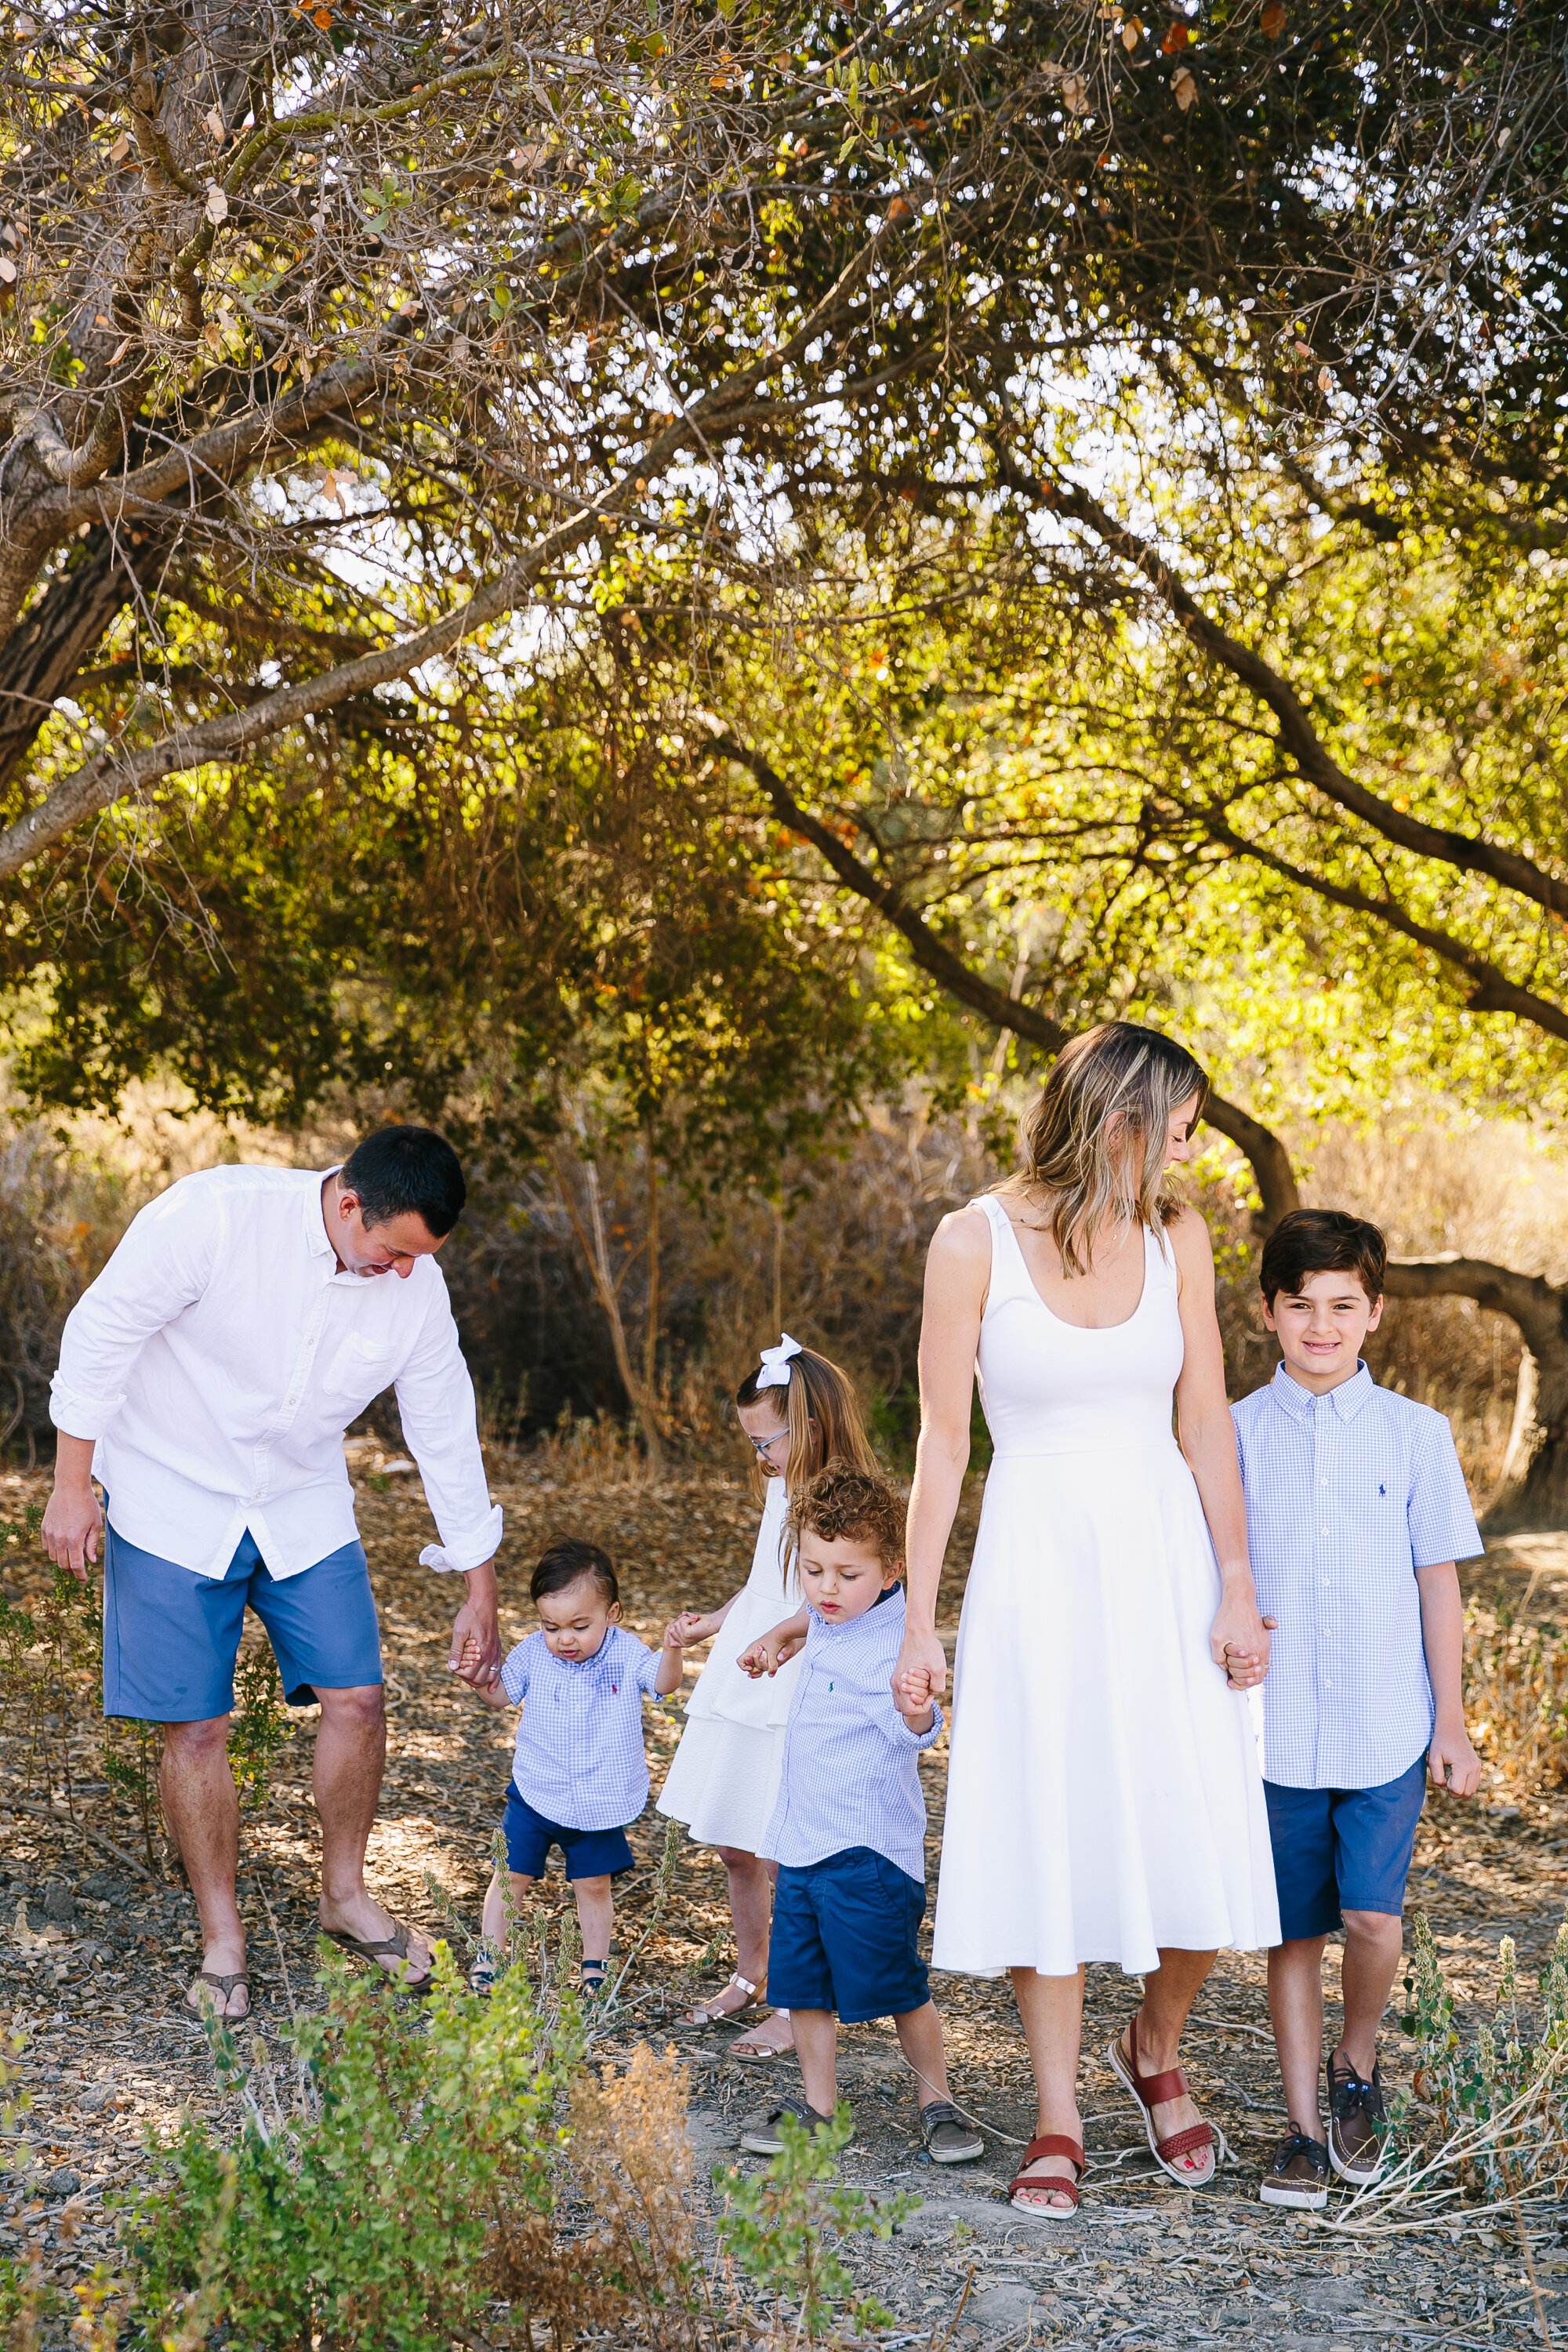 Los_Angeles_Family_Photography_Orange_County_Children_Babies_Field_Farm_Outdoors_Morning_Session_California_Girls_Boys_Kids_Photography-0144.jpg